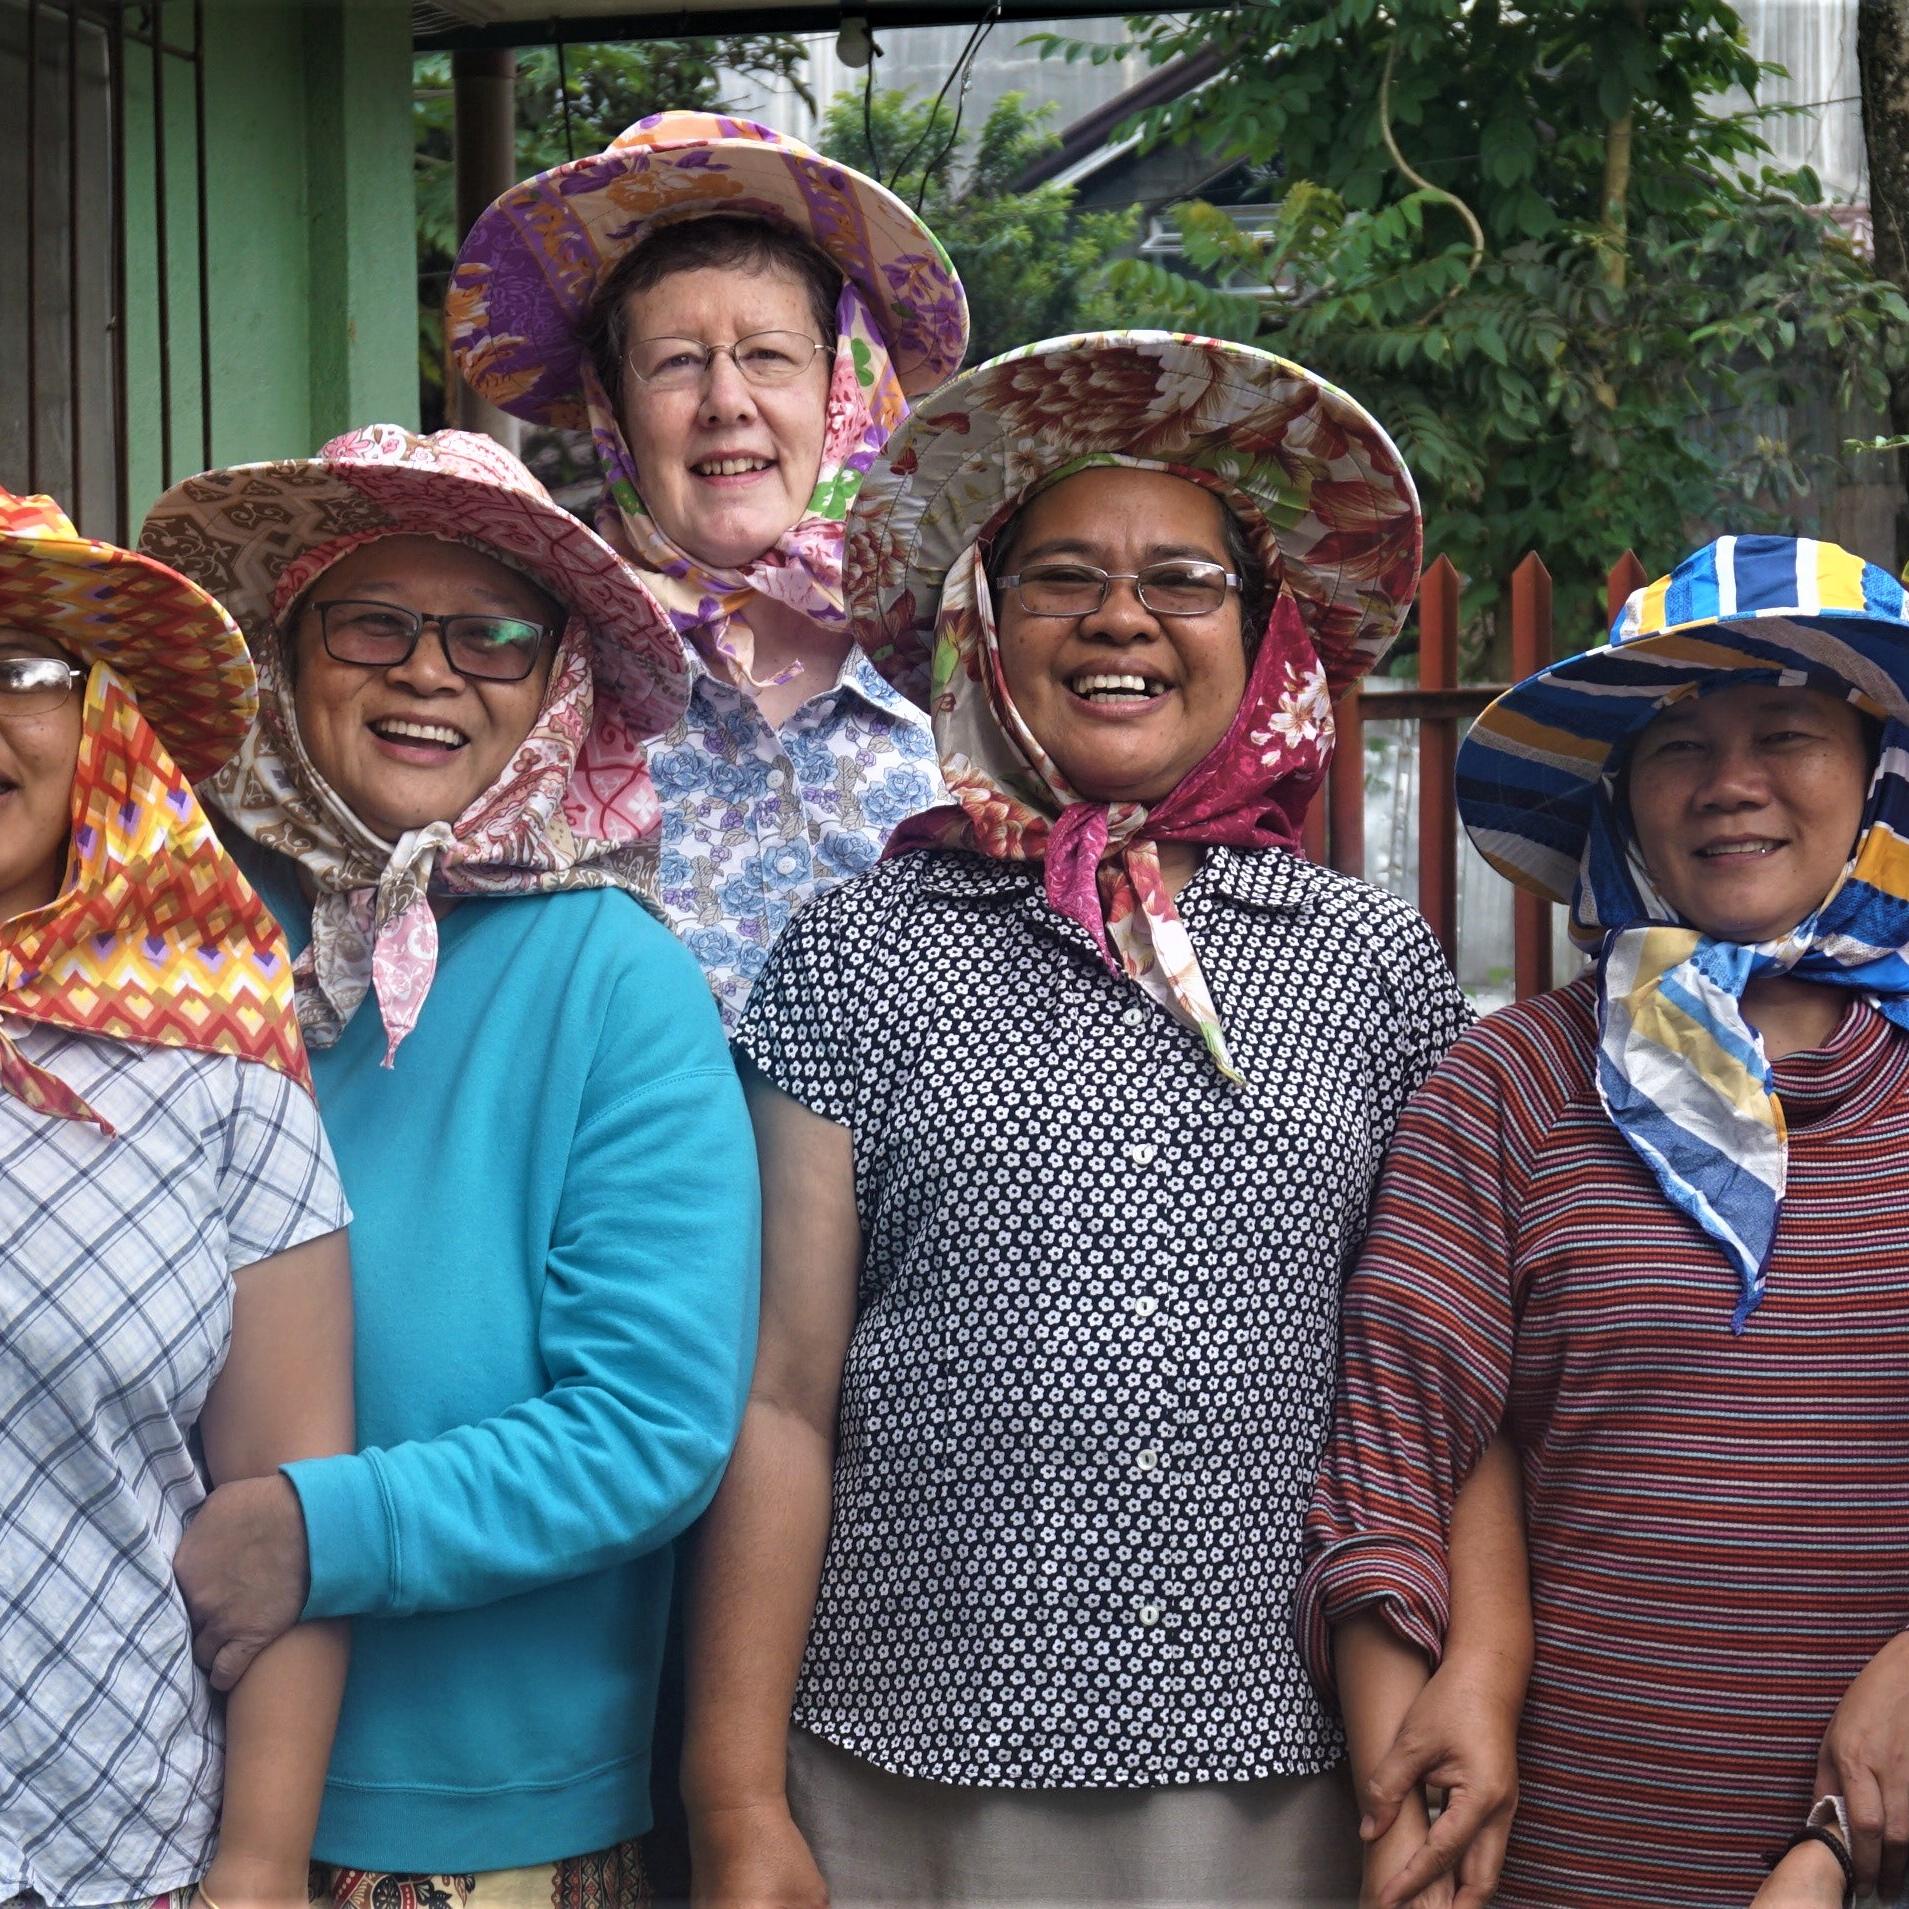 Wearing traditional hats in The Philippines